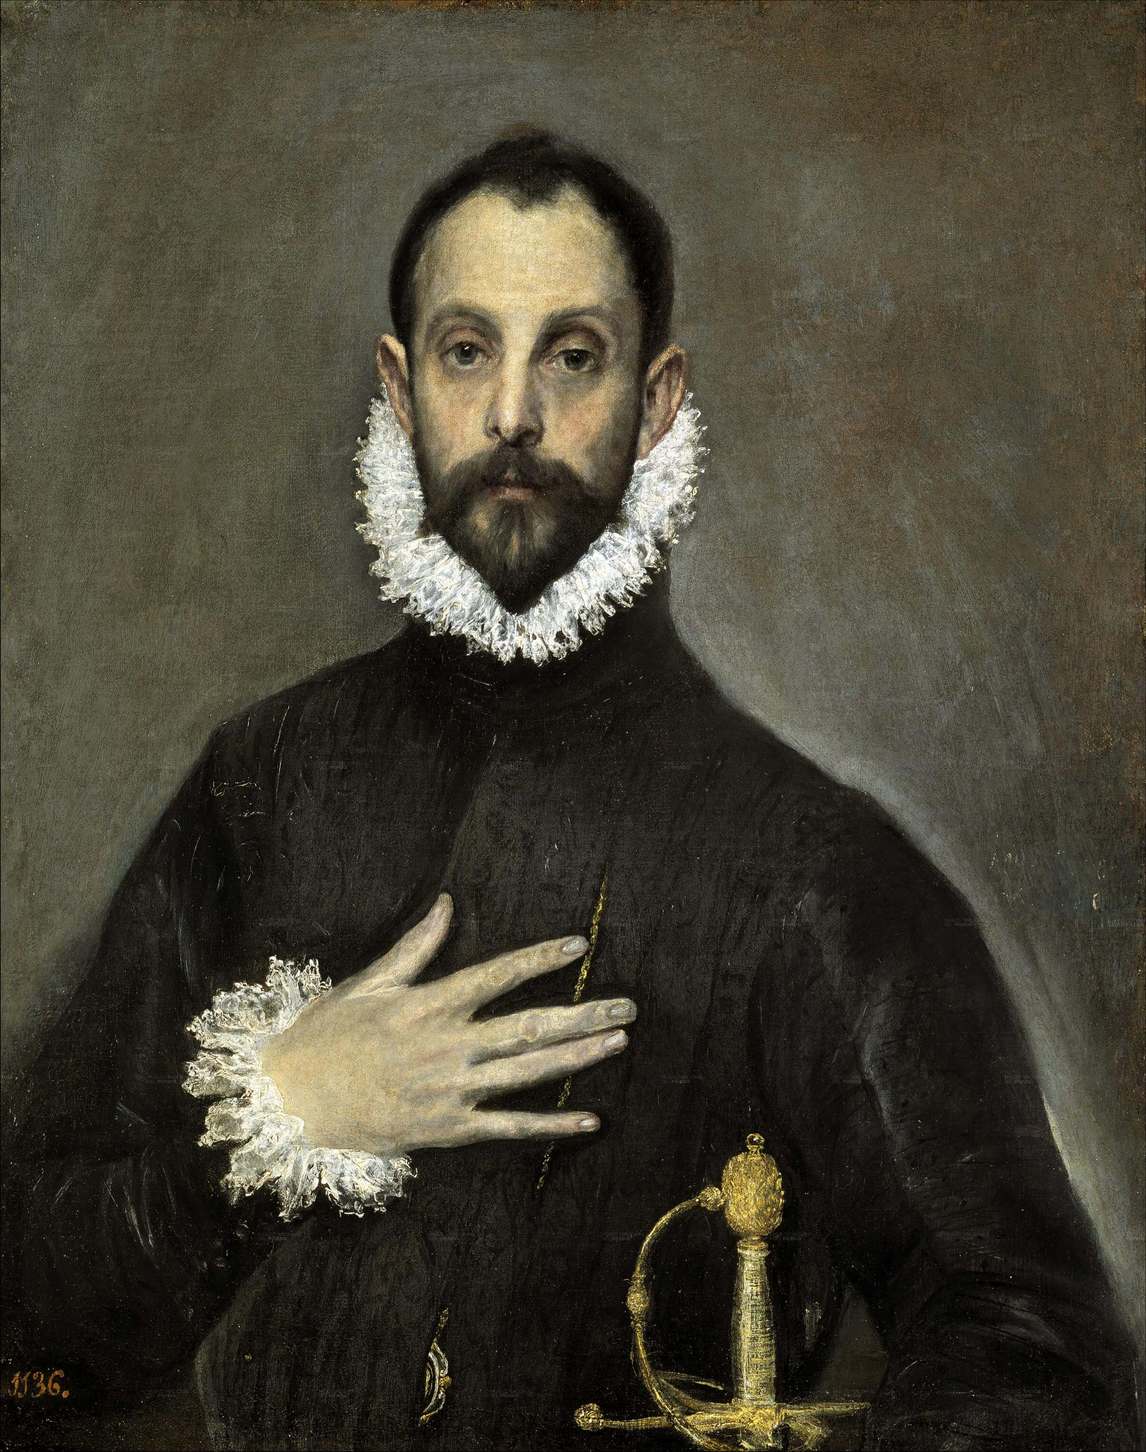 Art Canada Institute, General Idea, El Greco, The Nobleman with his Hand on his Chest, c. 1580